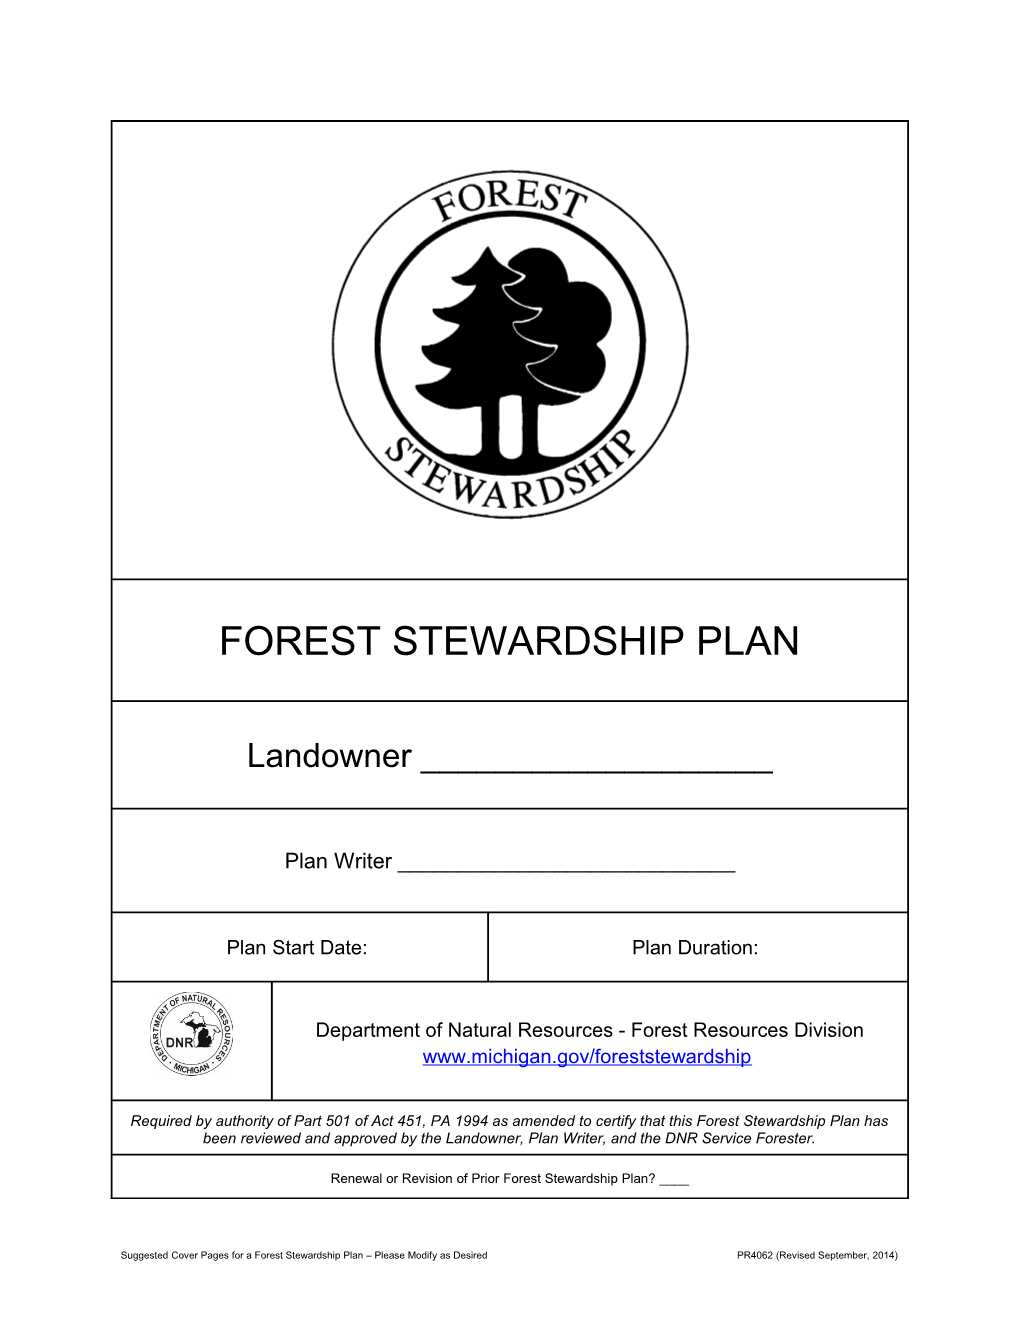 Suggested Cover Pages for a Forest Stewardship Plan Please Modify As Desired PR4062 (Revised